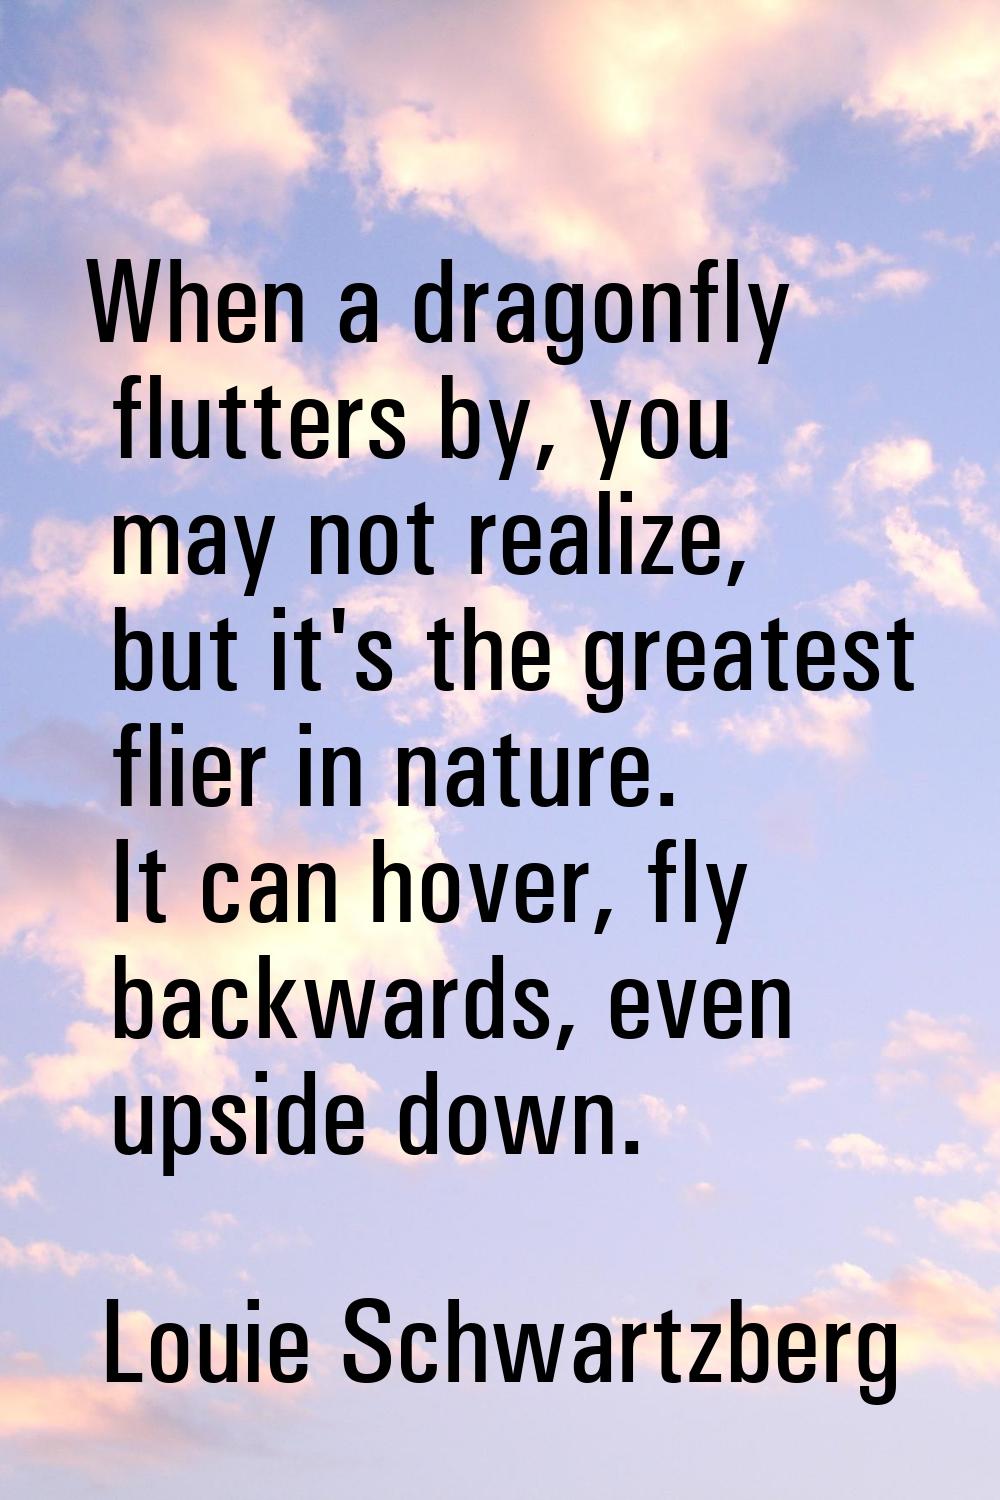 When a dragonfly flutters by, you may not realize, but it's the greatest flier in nature. It can ho